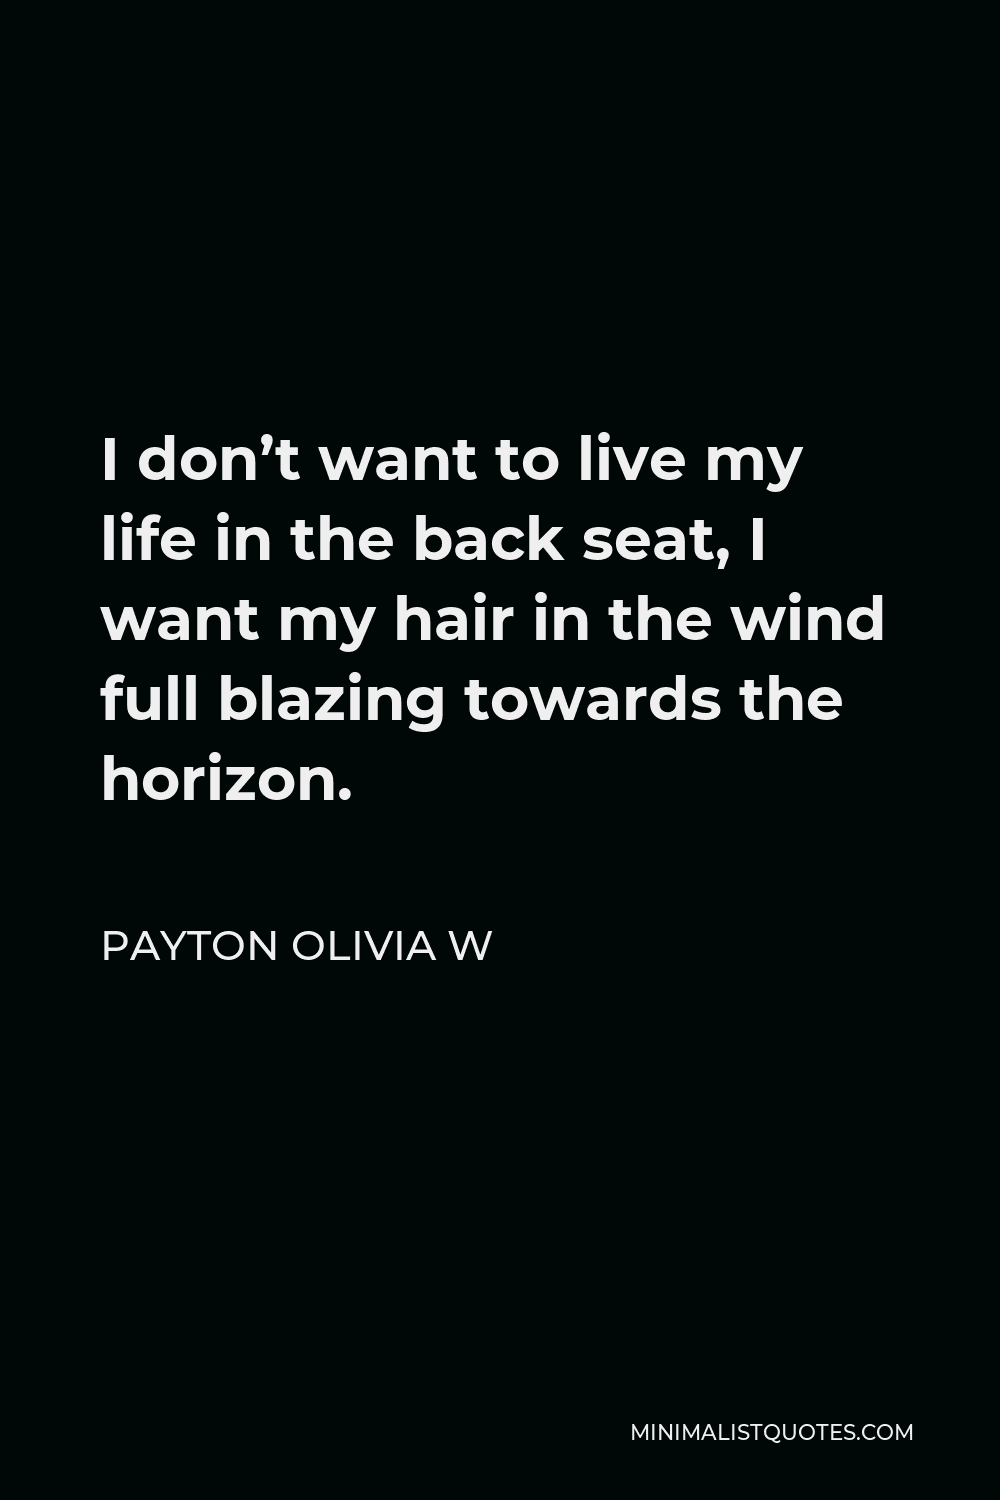 Payton Olivia W Quote - I don’t want to live my life in the back seat, I want my hair in the wind full blazing towards the horizon.